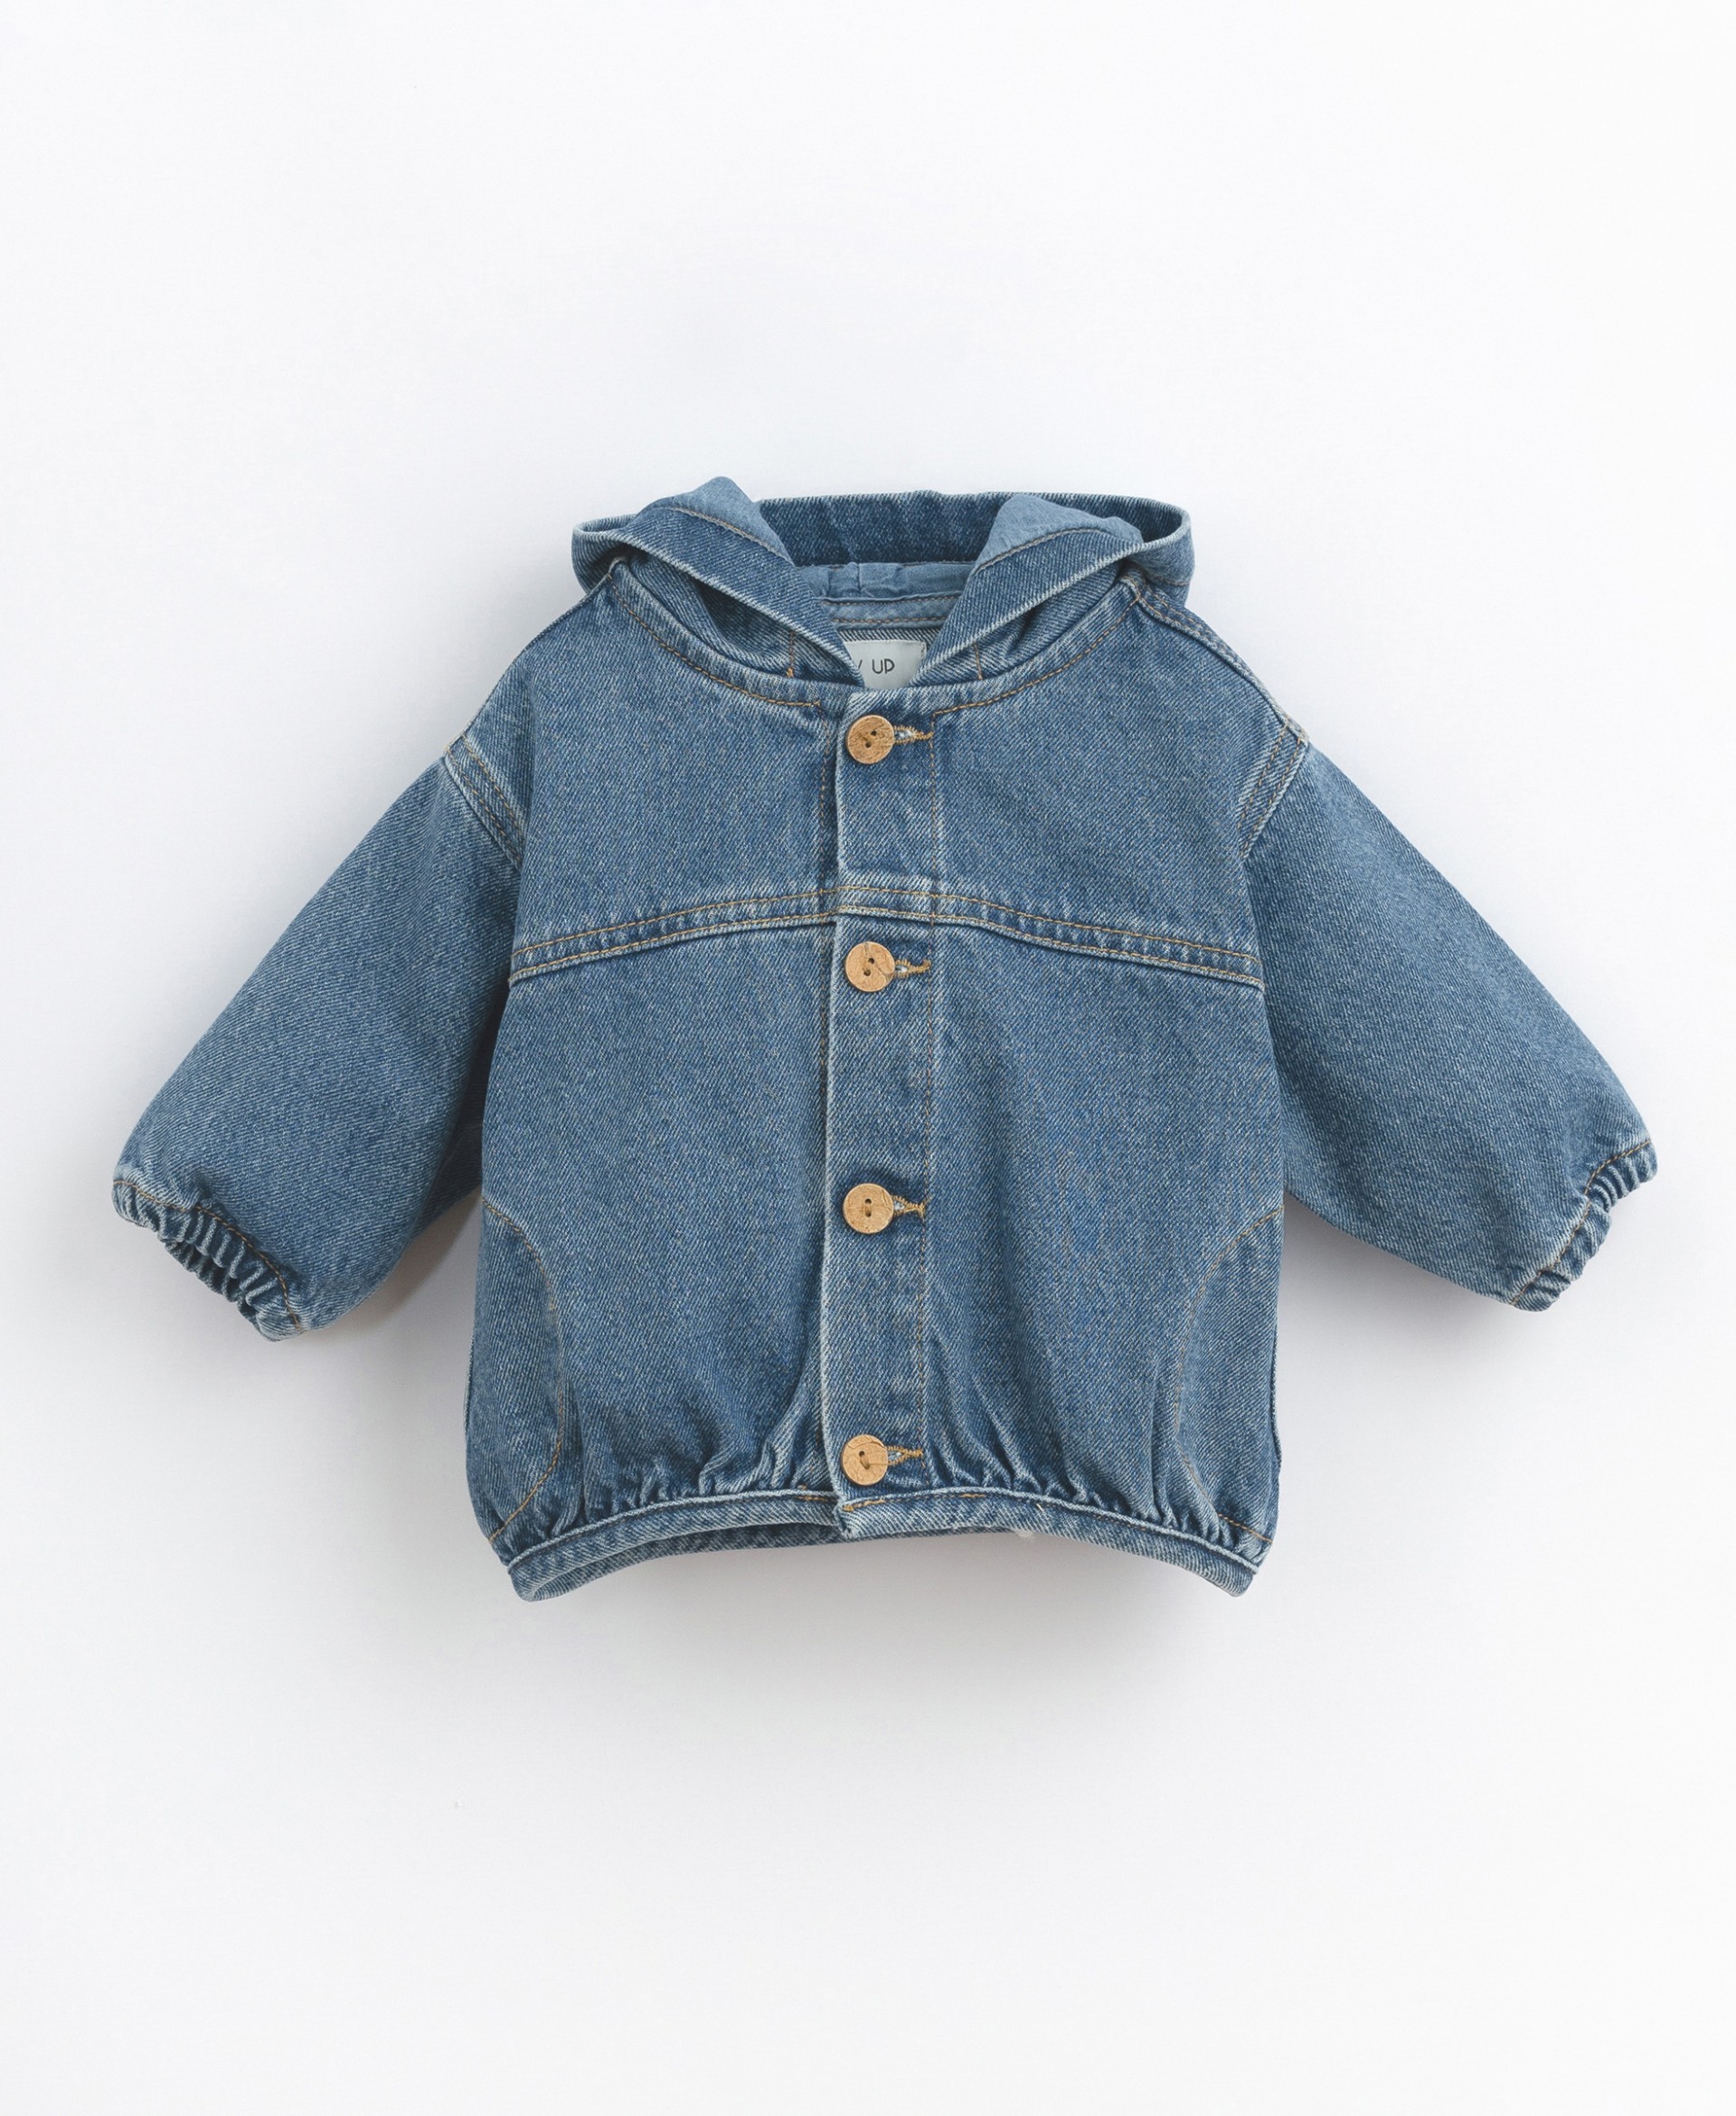 Jacket in cotton denim with pockets | Basketry